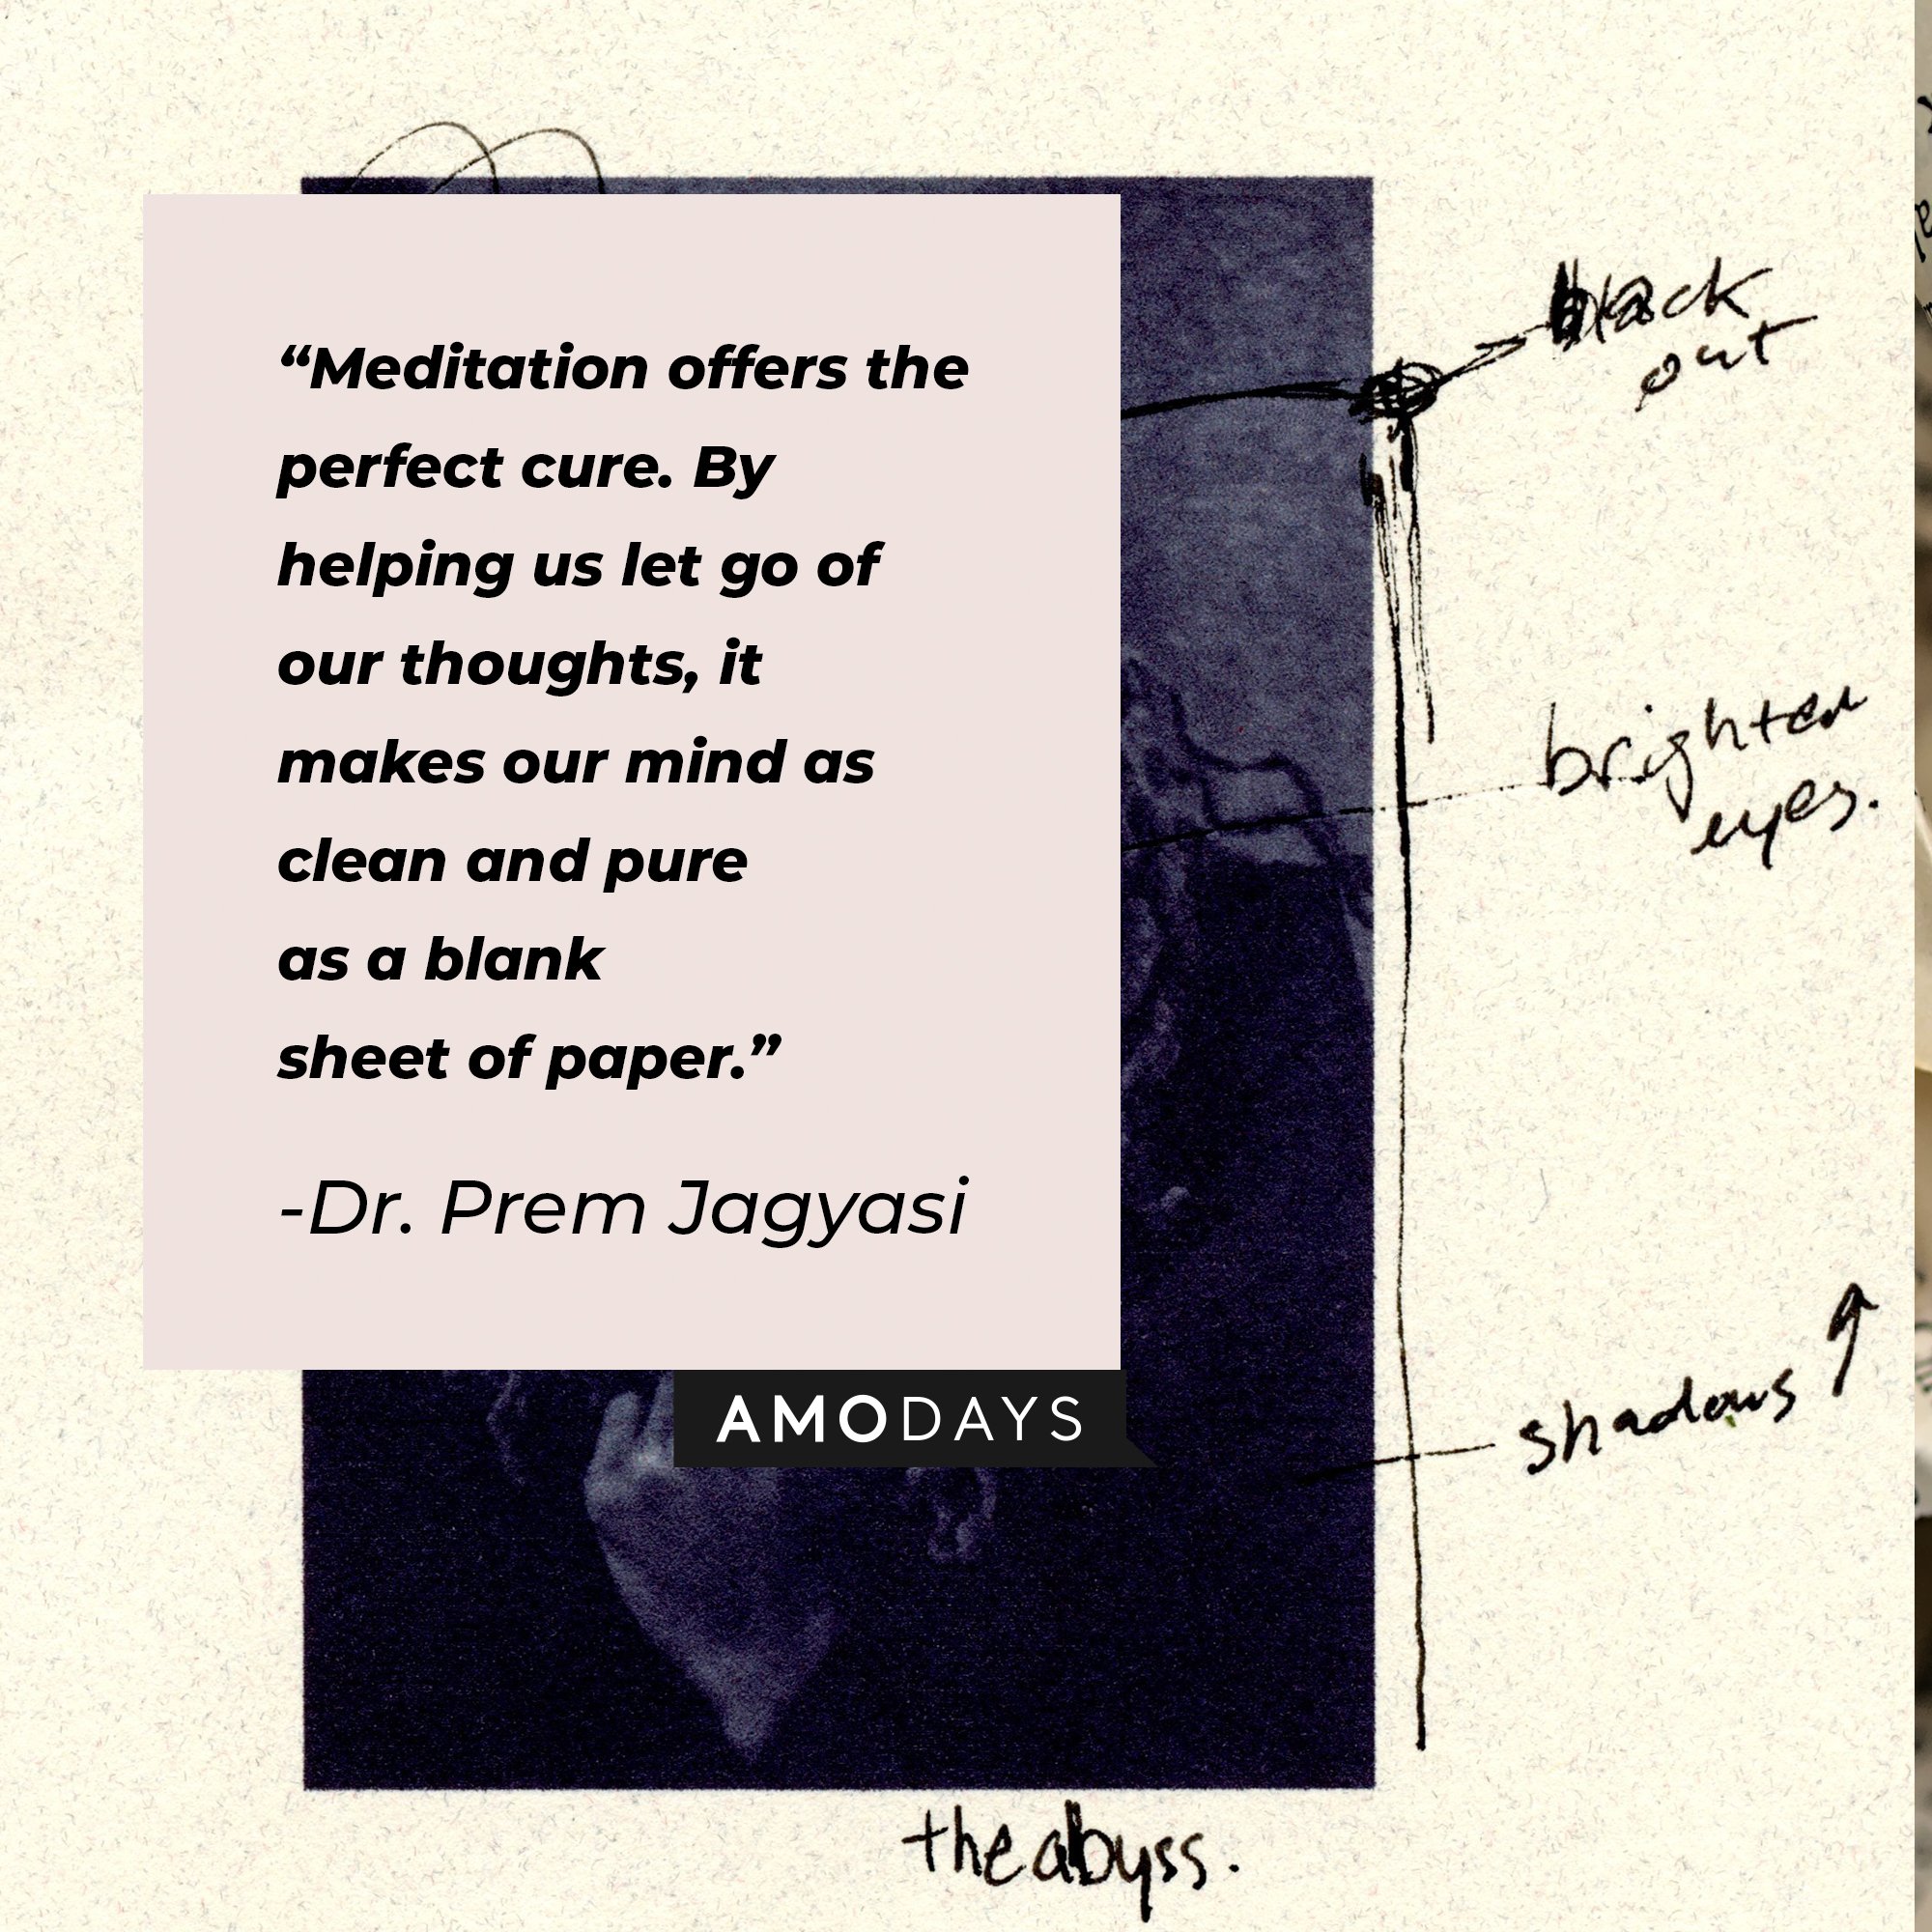 Dr. Prem Jagyasi’s quote: "Meditation offers the perfect cure. By helping us let go of our thoughts, it makes our mind as clean and pure as a blank sheet of paper." | Image: AmoDays